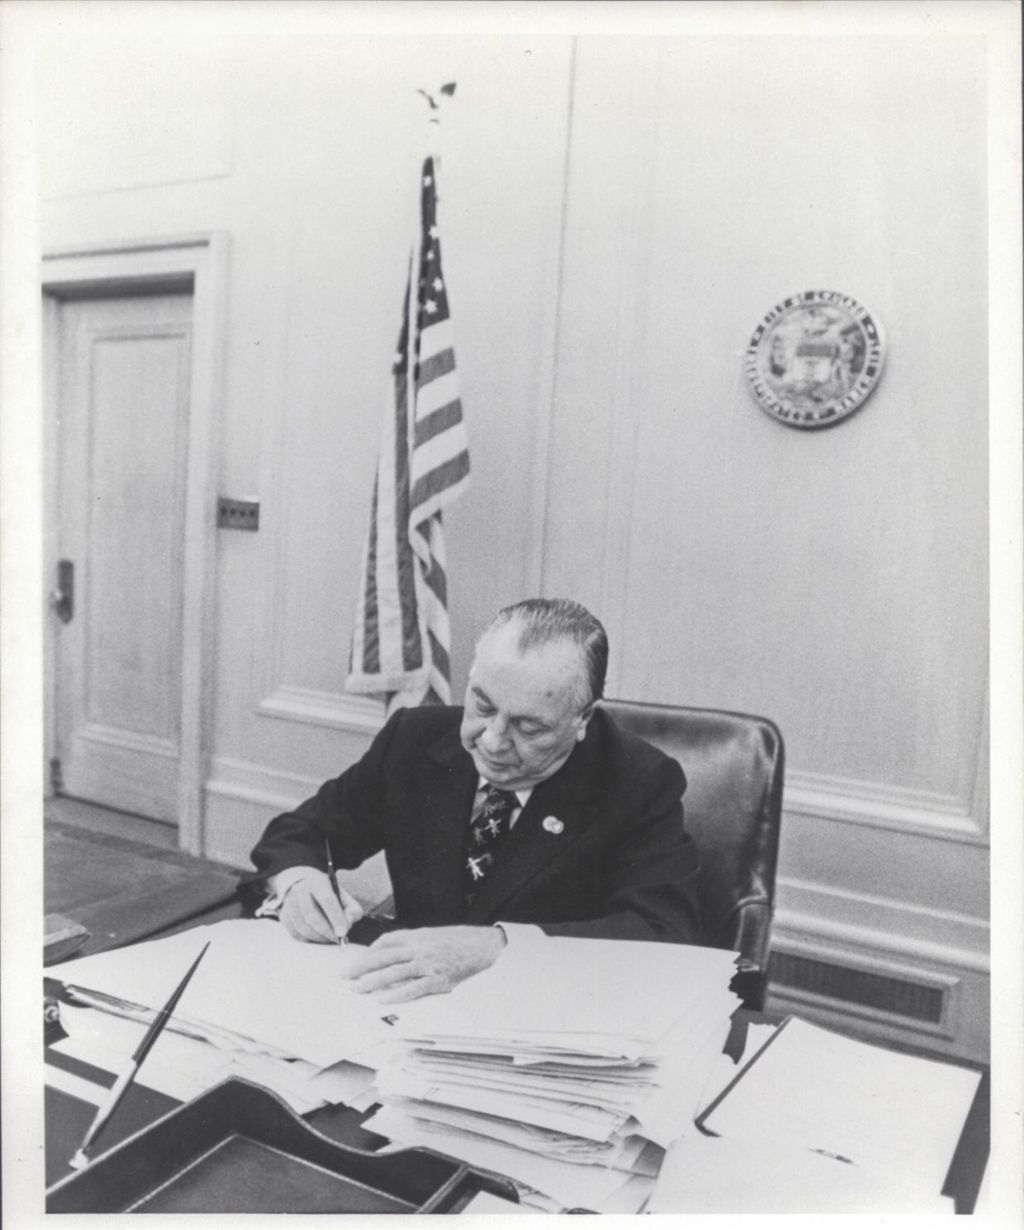 Miniature of Richard J. Daley working at his desk